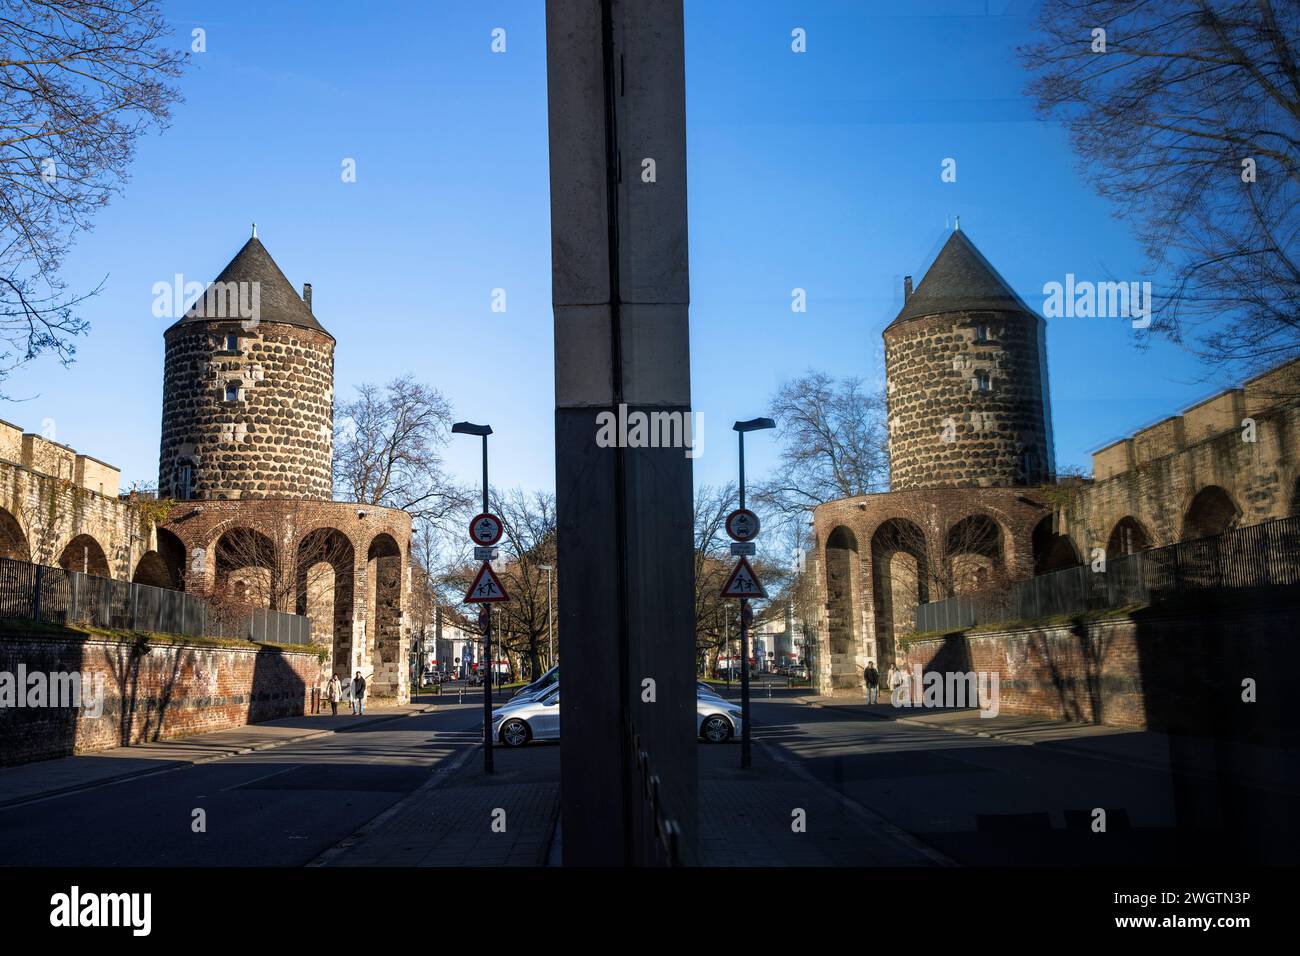 the tower of the Gereons mill on the street Gereonswall, building of the medieval town wall, reflection in a window, Cologne, Germany. der Gereonsmueh Stock Photo